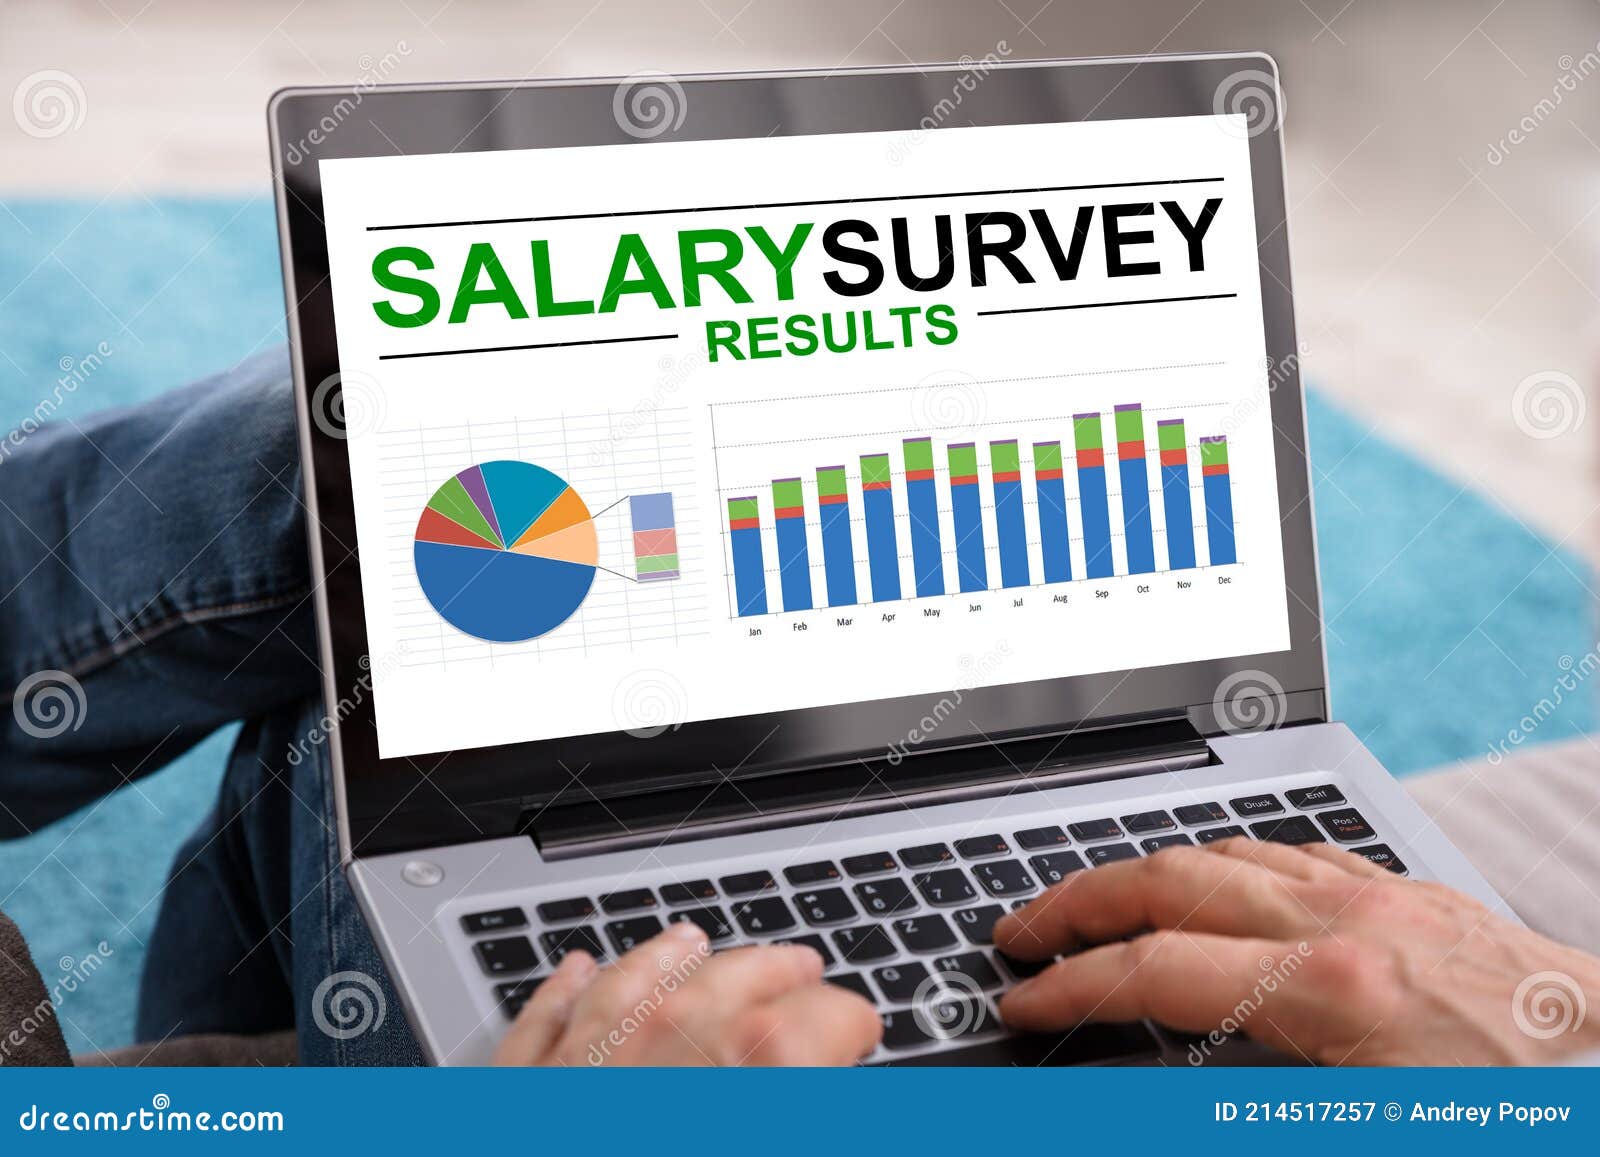 person analyzing salary survey results on laptop